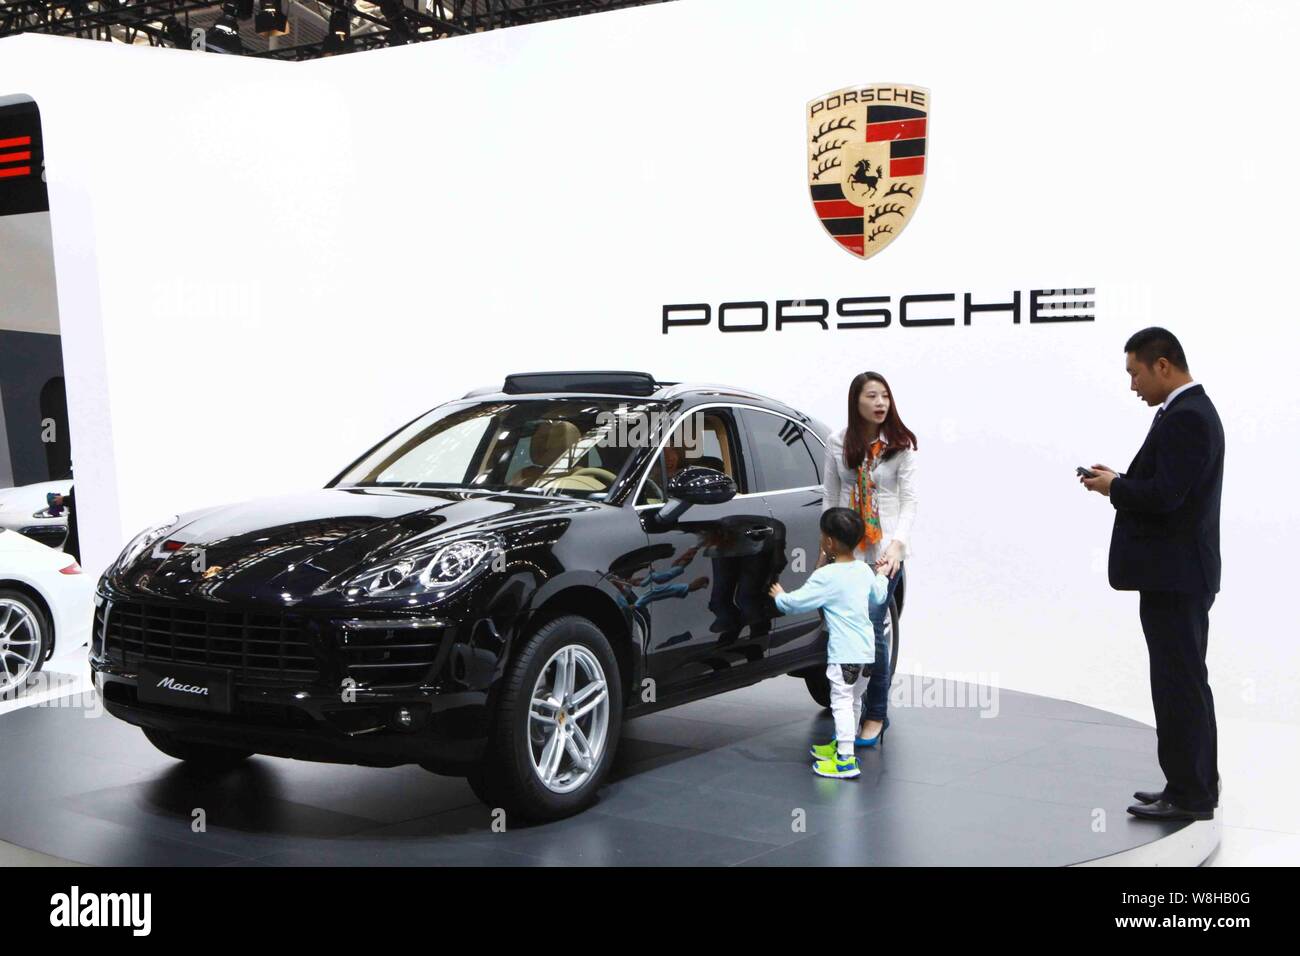 --FILE--Visitors look at a Porsche Macan during an automobile exhibition in Tianjin, China, 3 October 2014.   Foreign investment into China accelerate Stock Photo